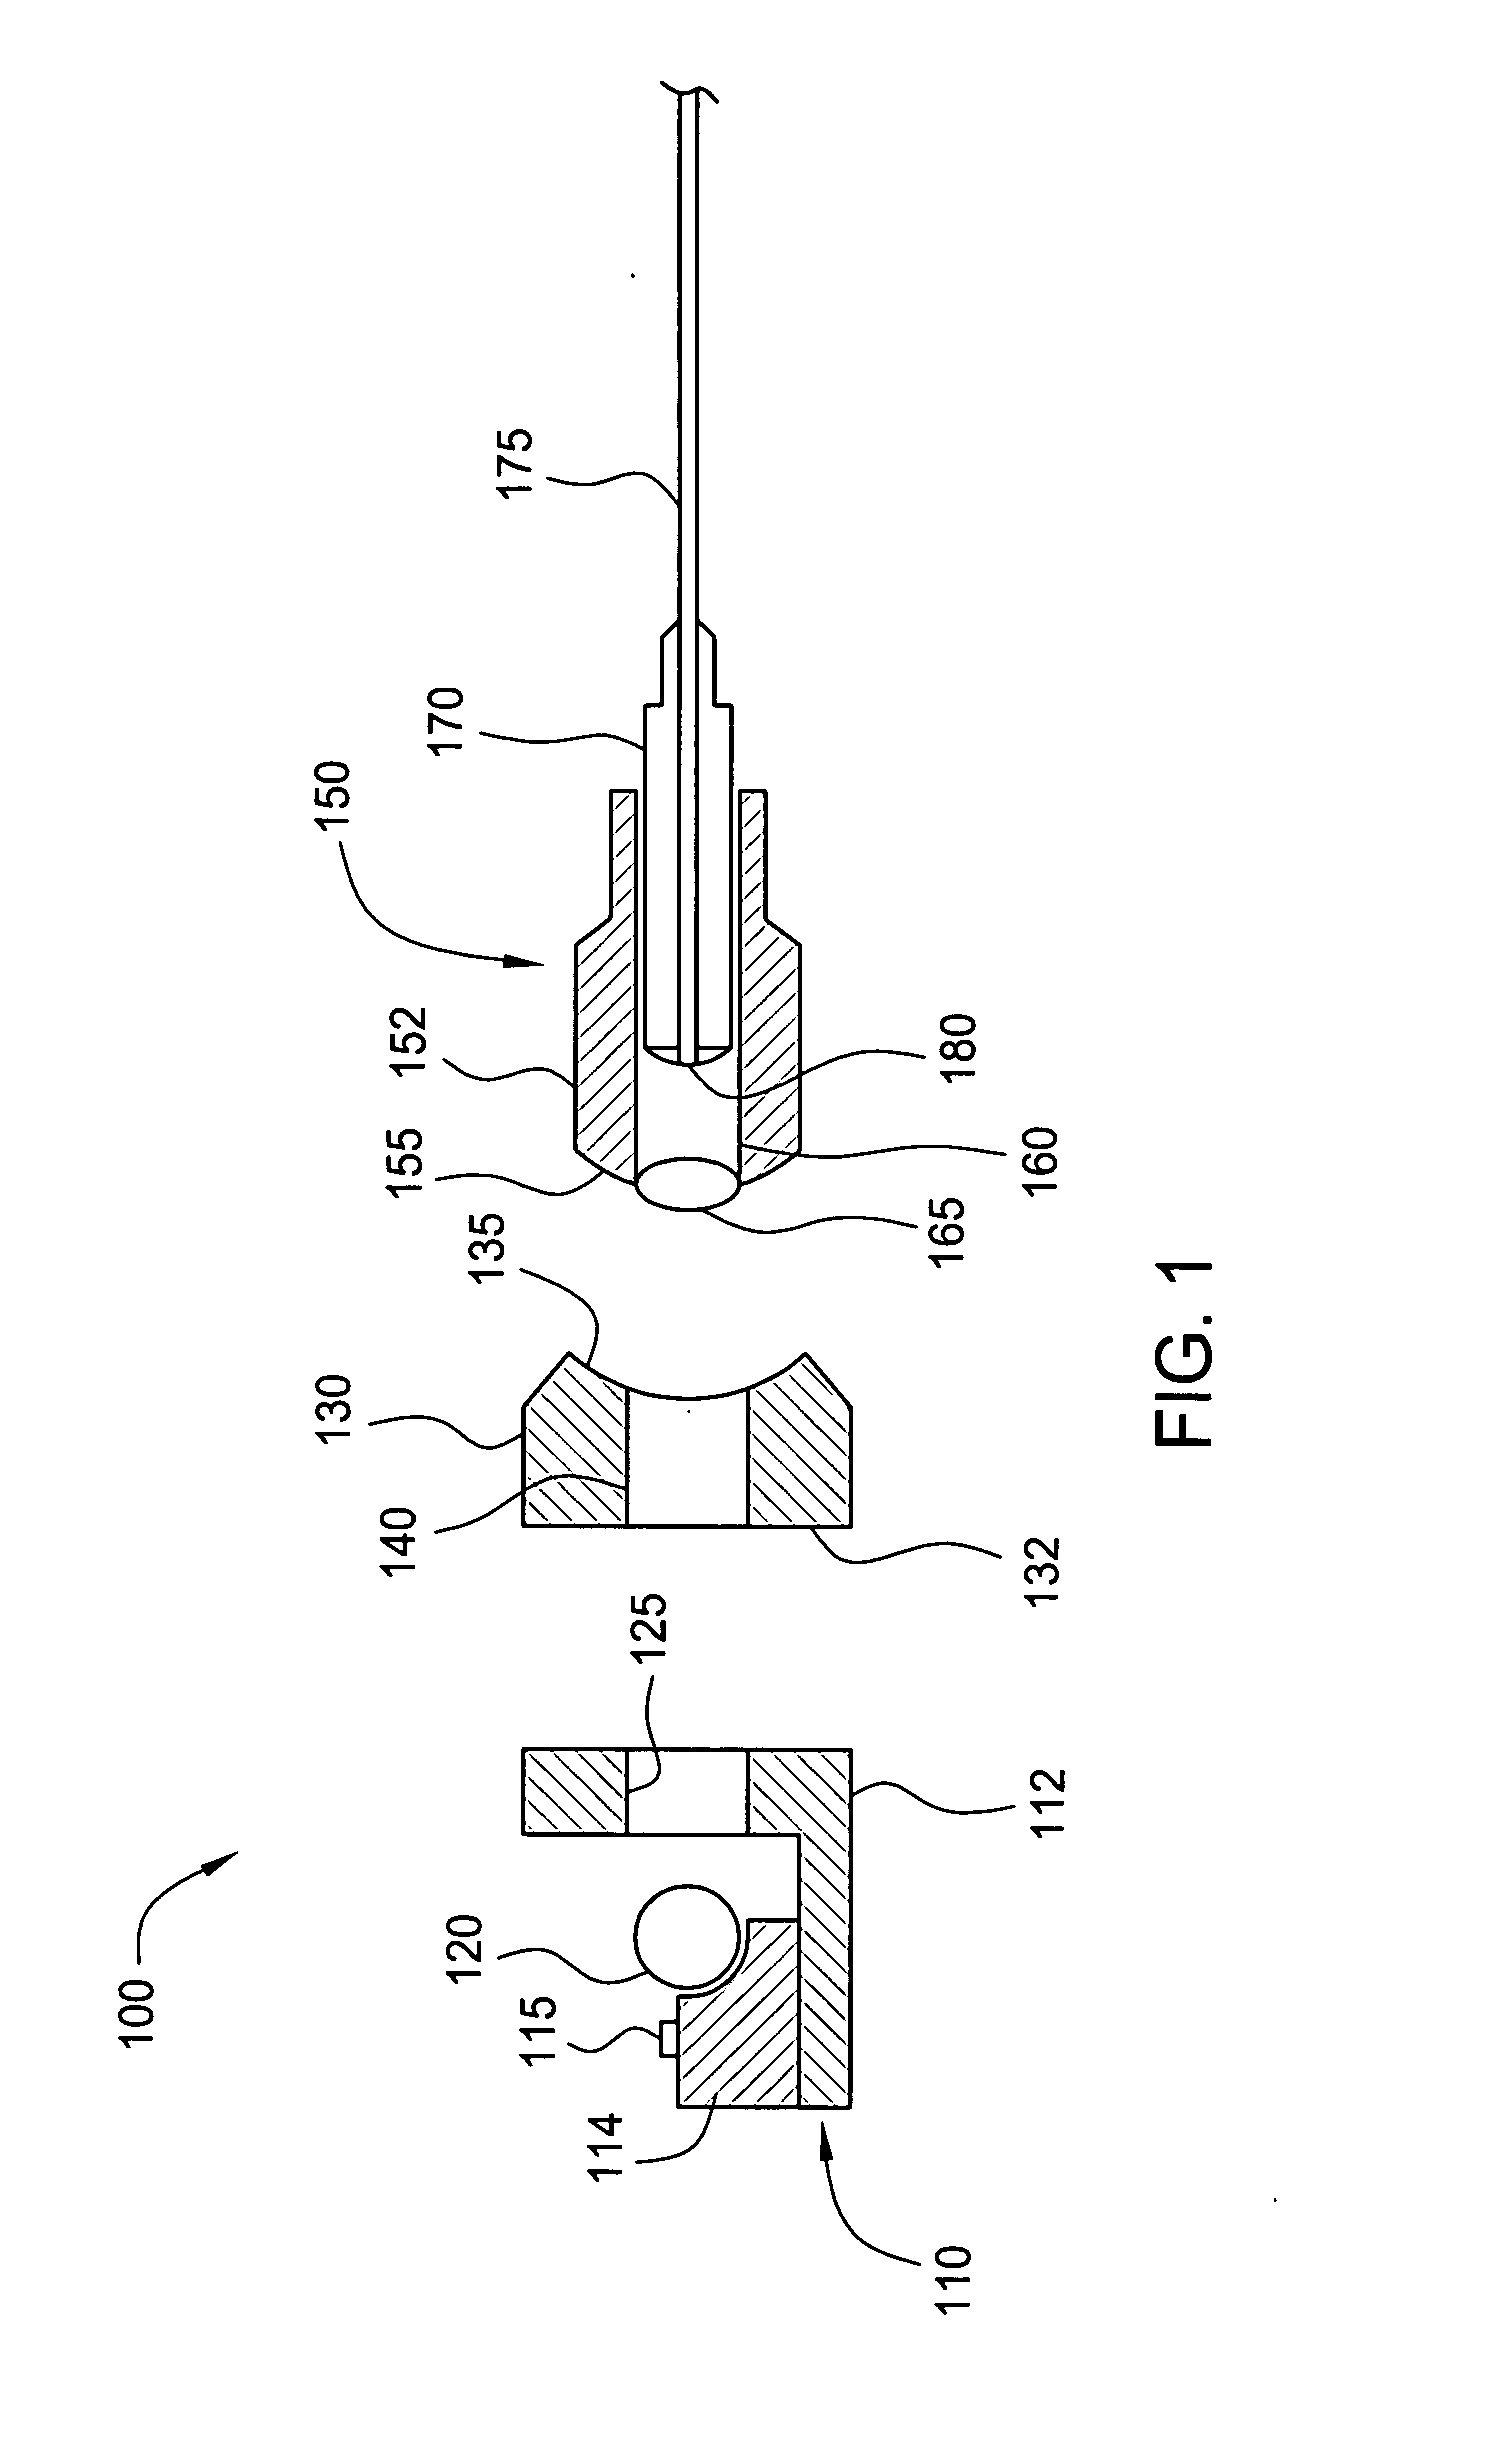 System and method for assembling optical components